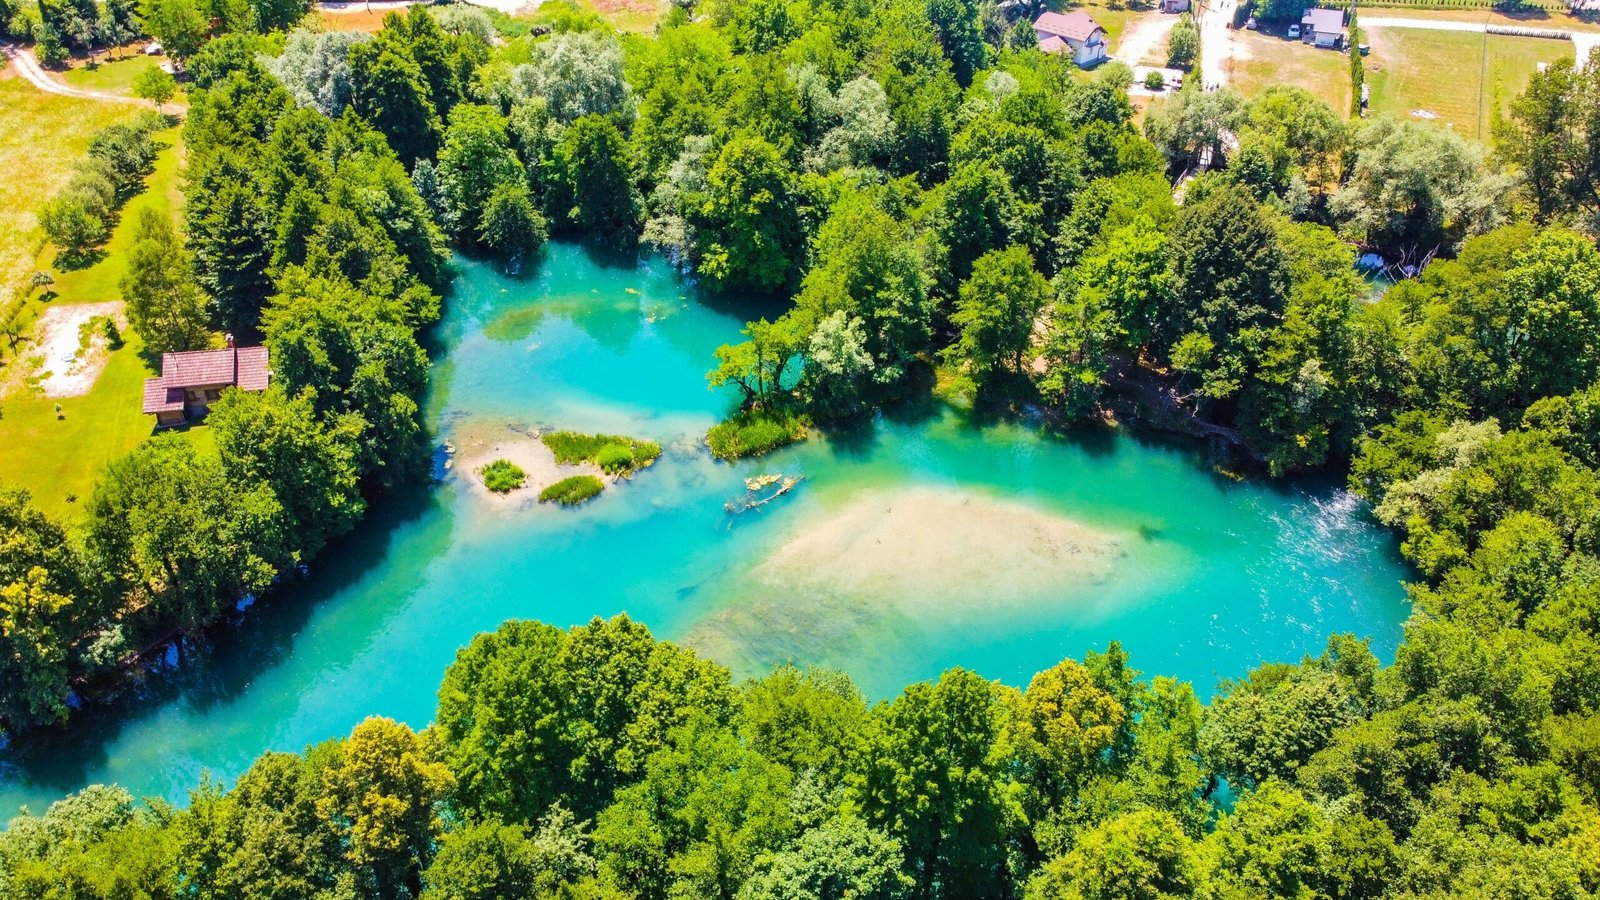 What to see in Bihac - Japodian Islands